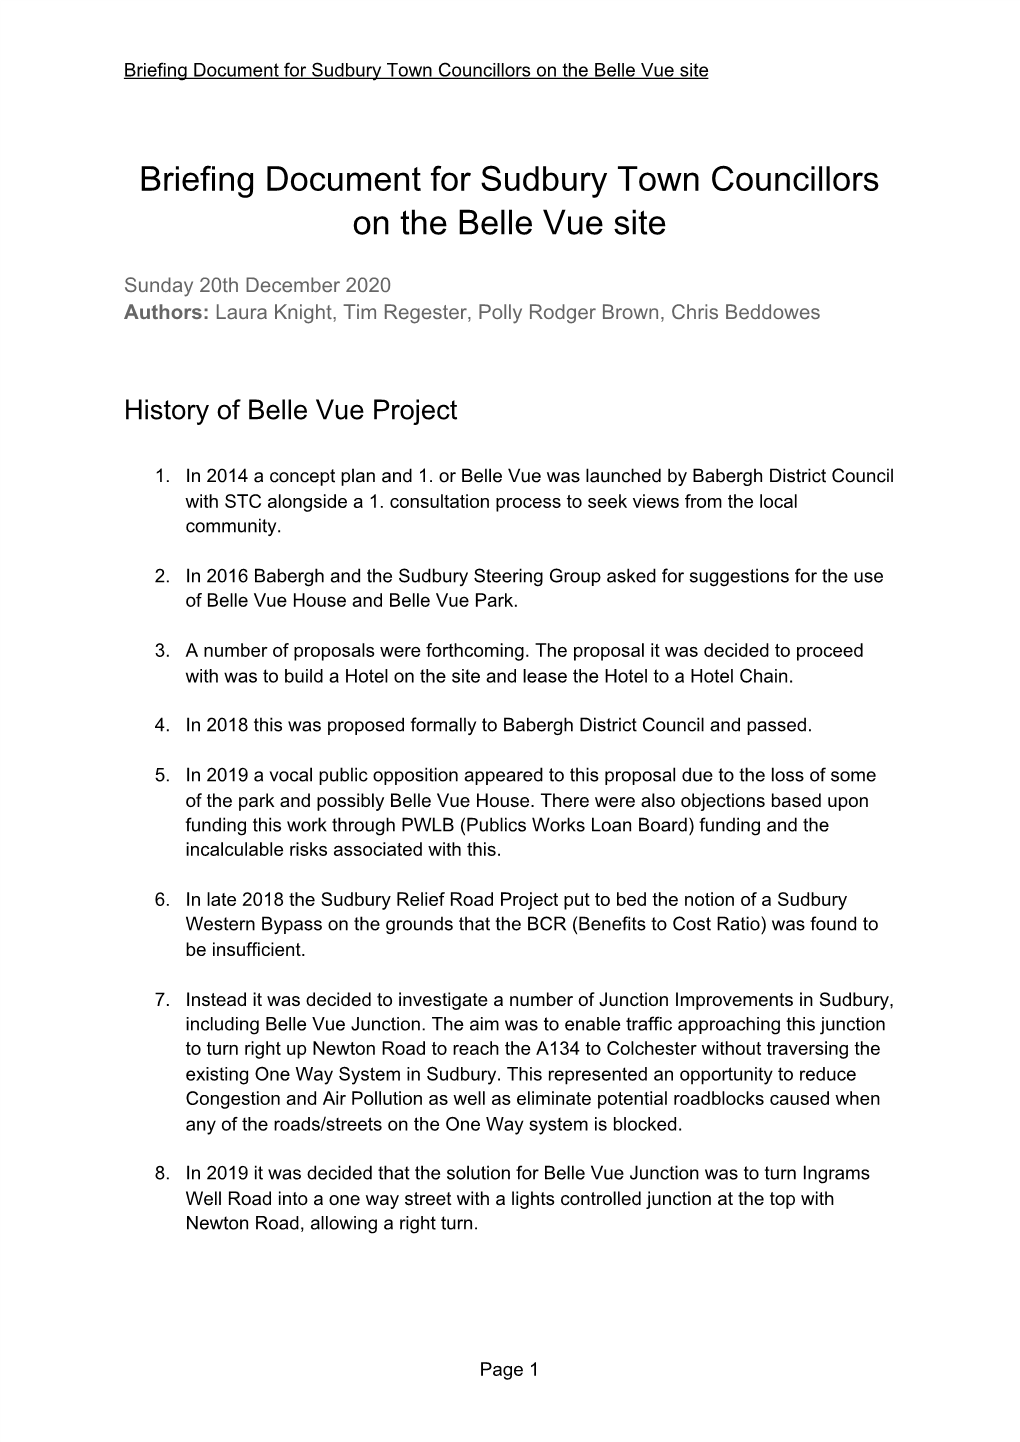 Briefing Document for Sudbury Town Councillors on the Belle Vue Site